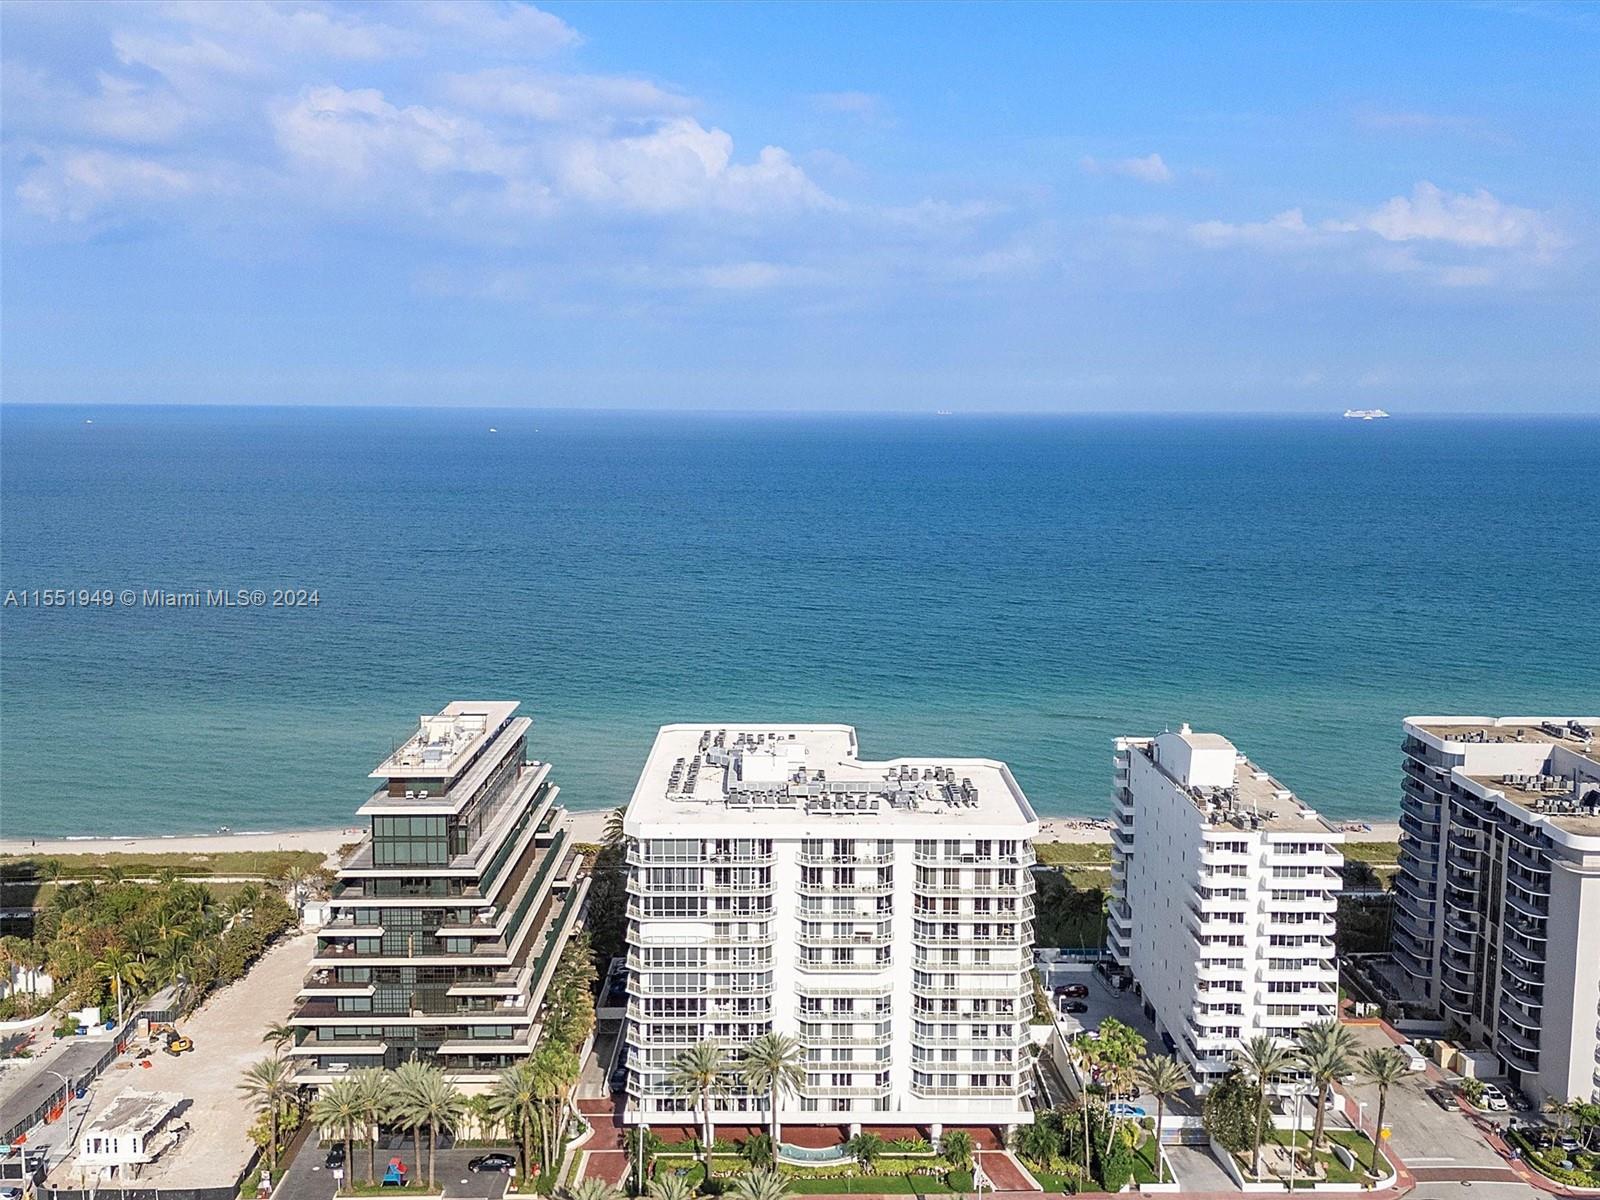 Penthouse 2 bedroom with 10' ceilings located directly on the beach in the beautiful town of Surfsid